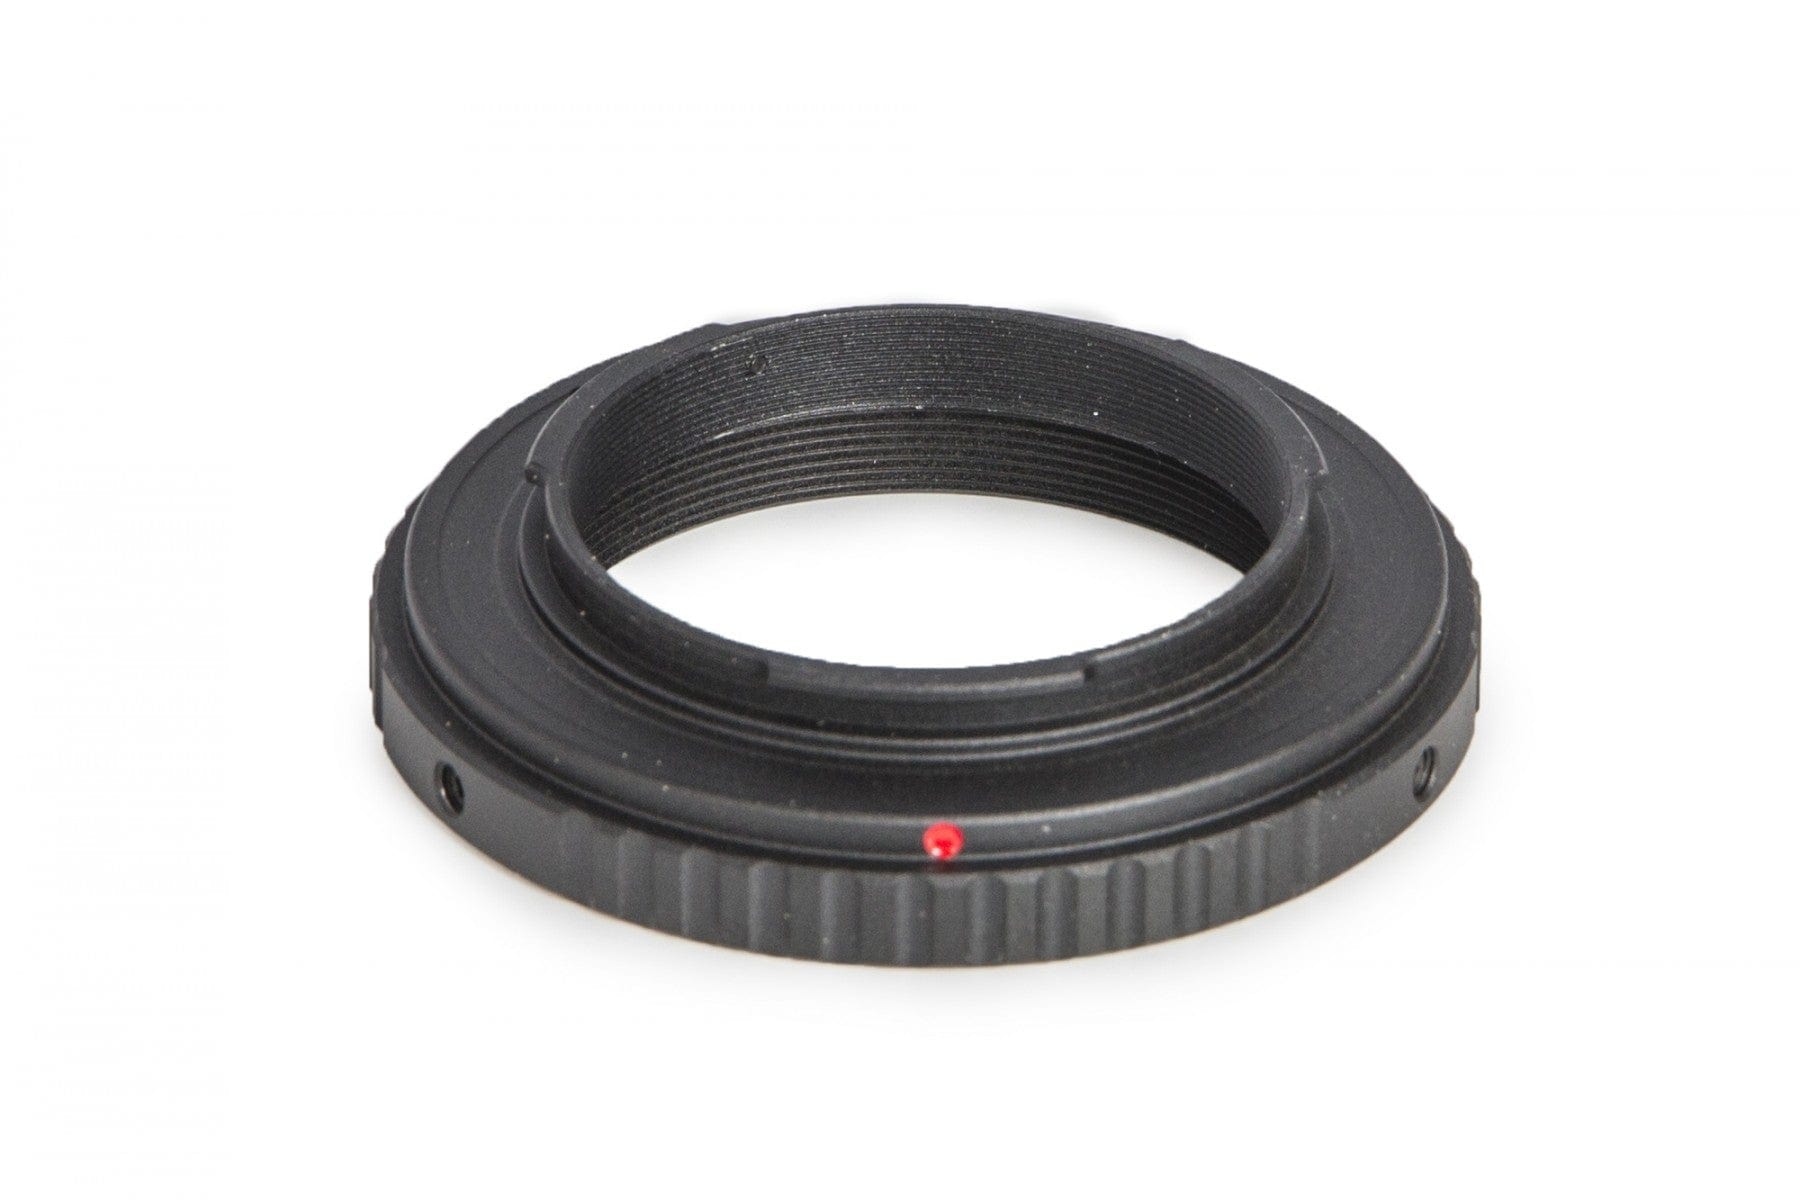 Baader Planetarium Accessory Baader Wide T-Ring Fujifilm X with D52i to T-2 and S52 - 2408331